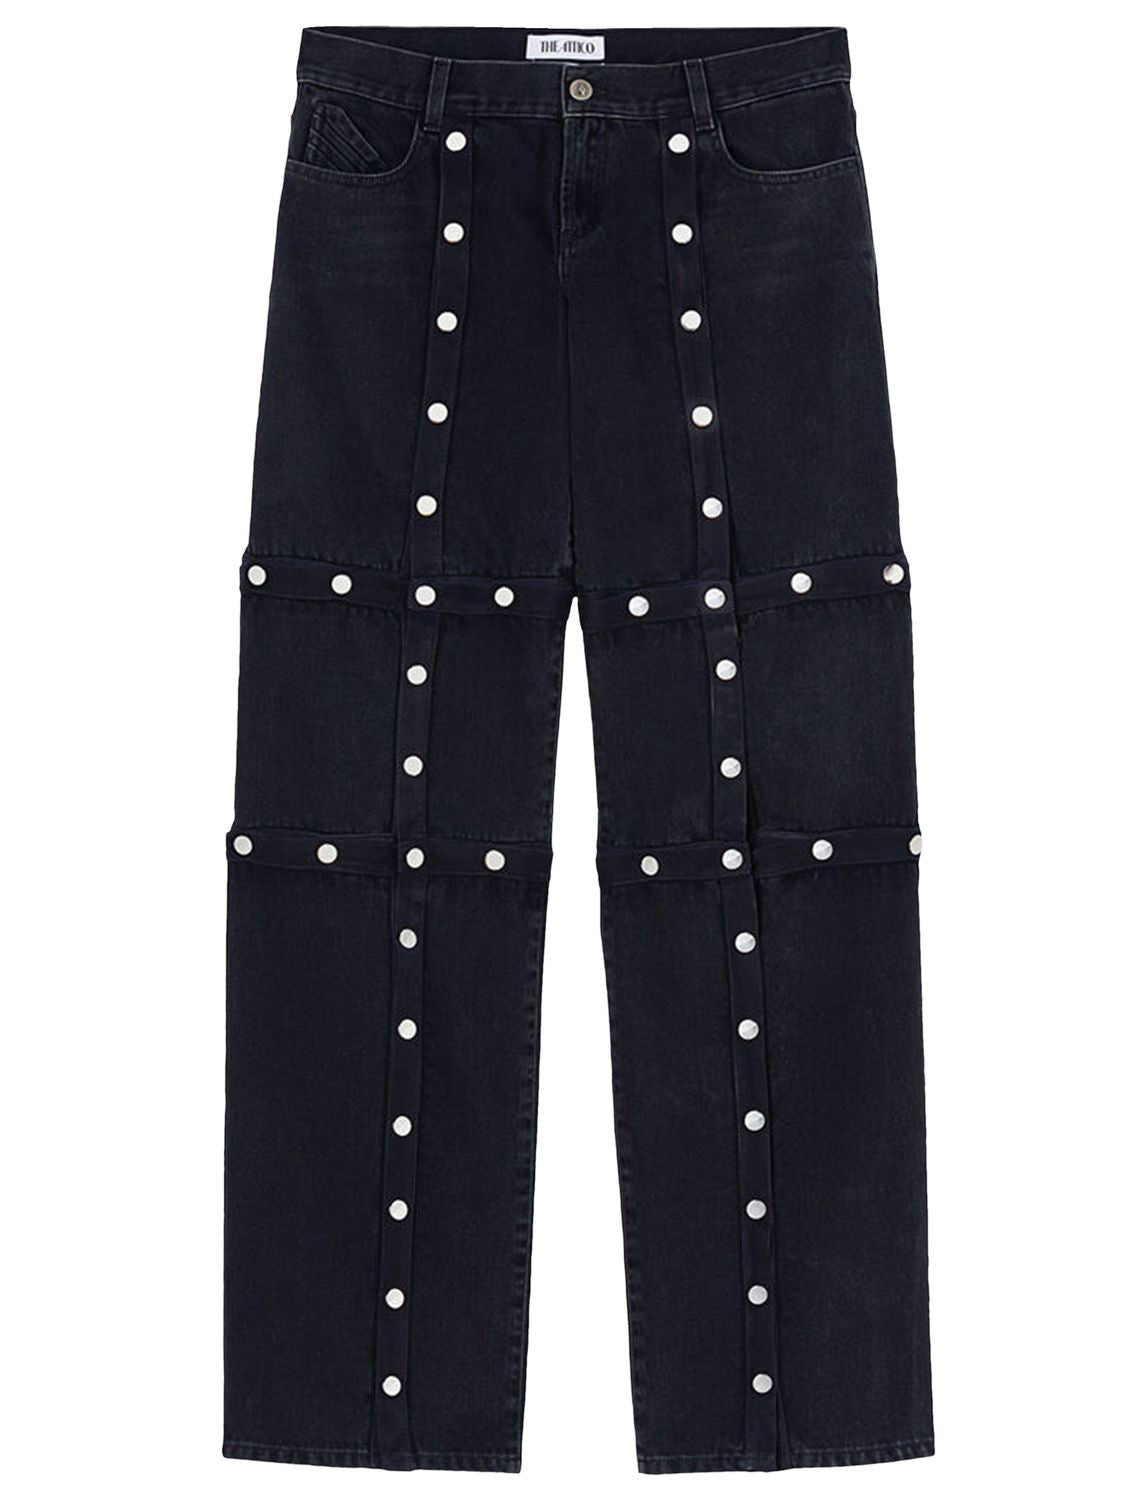 THE ATTICO Black Cotton Denim Pants with Logoed Snap Buttons for Women